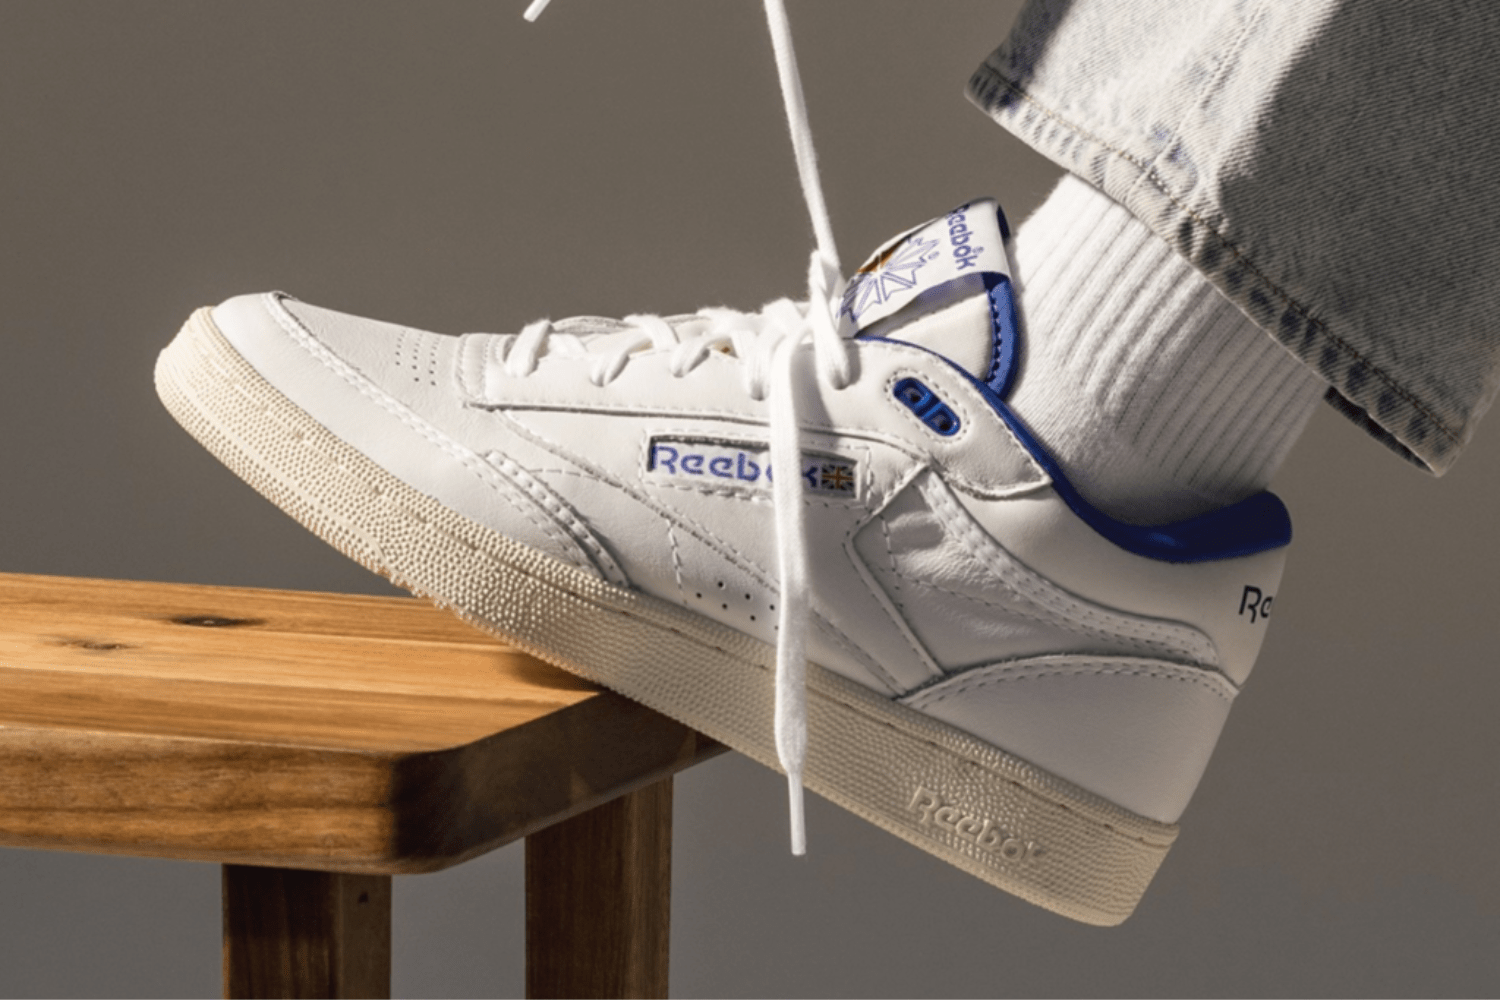 How to style the Reebok Club C?